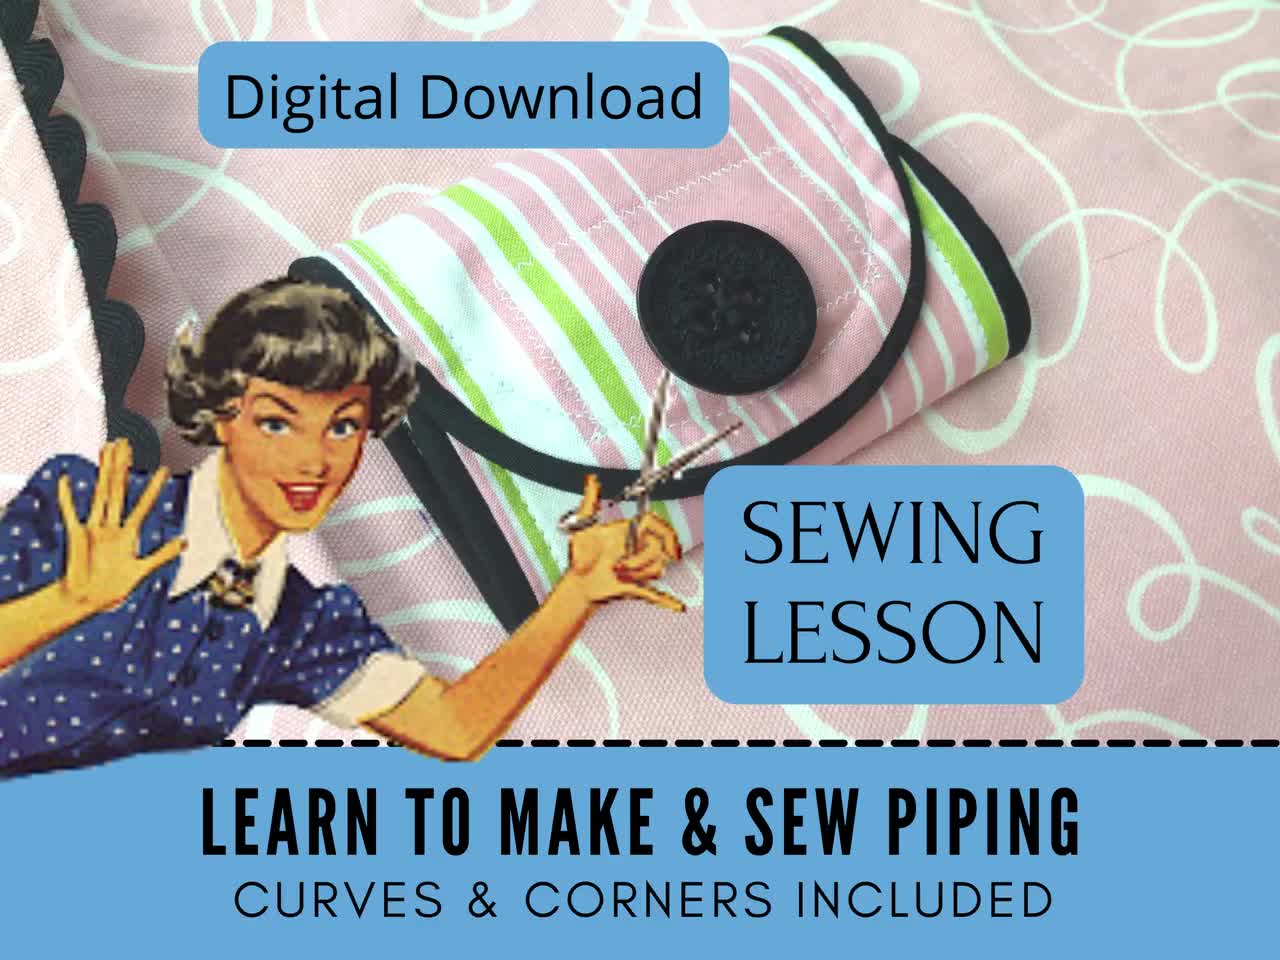 Sewing Lessons: How to Make & Sew Piping